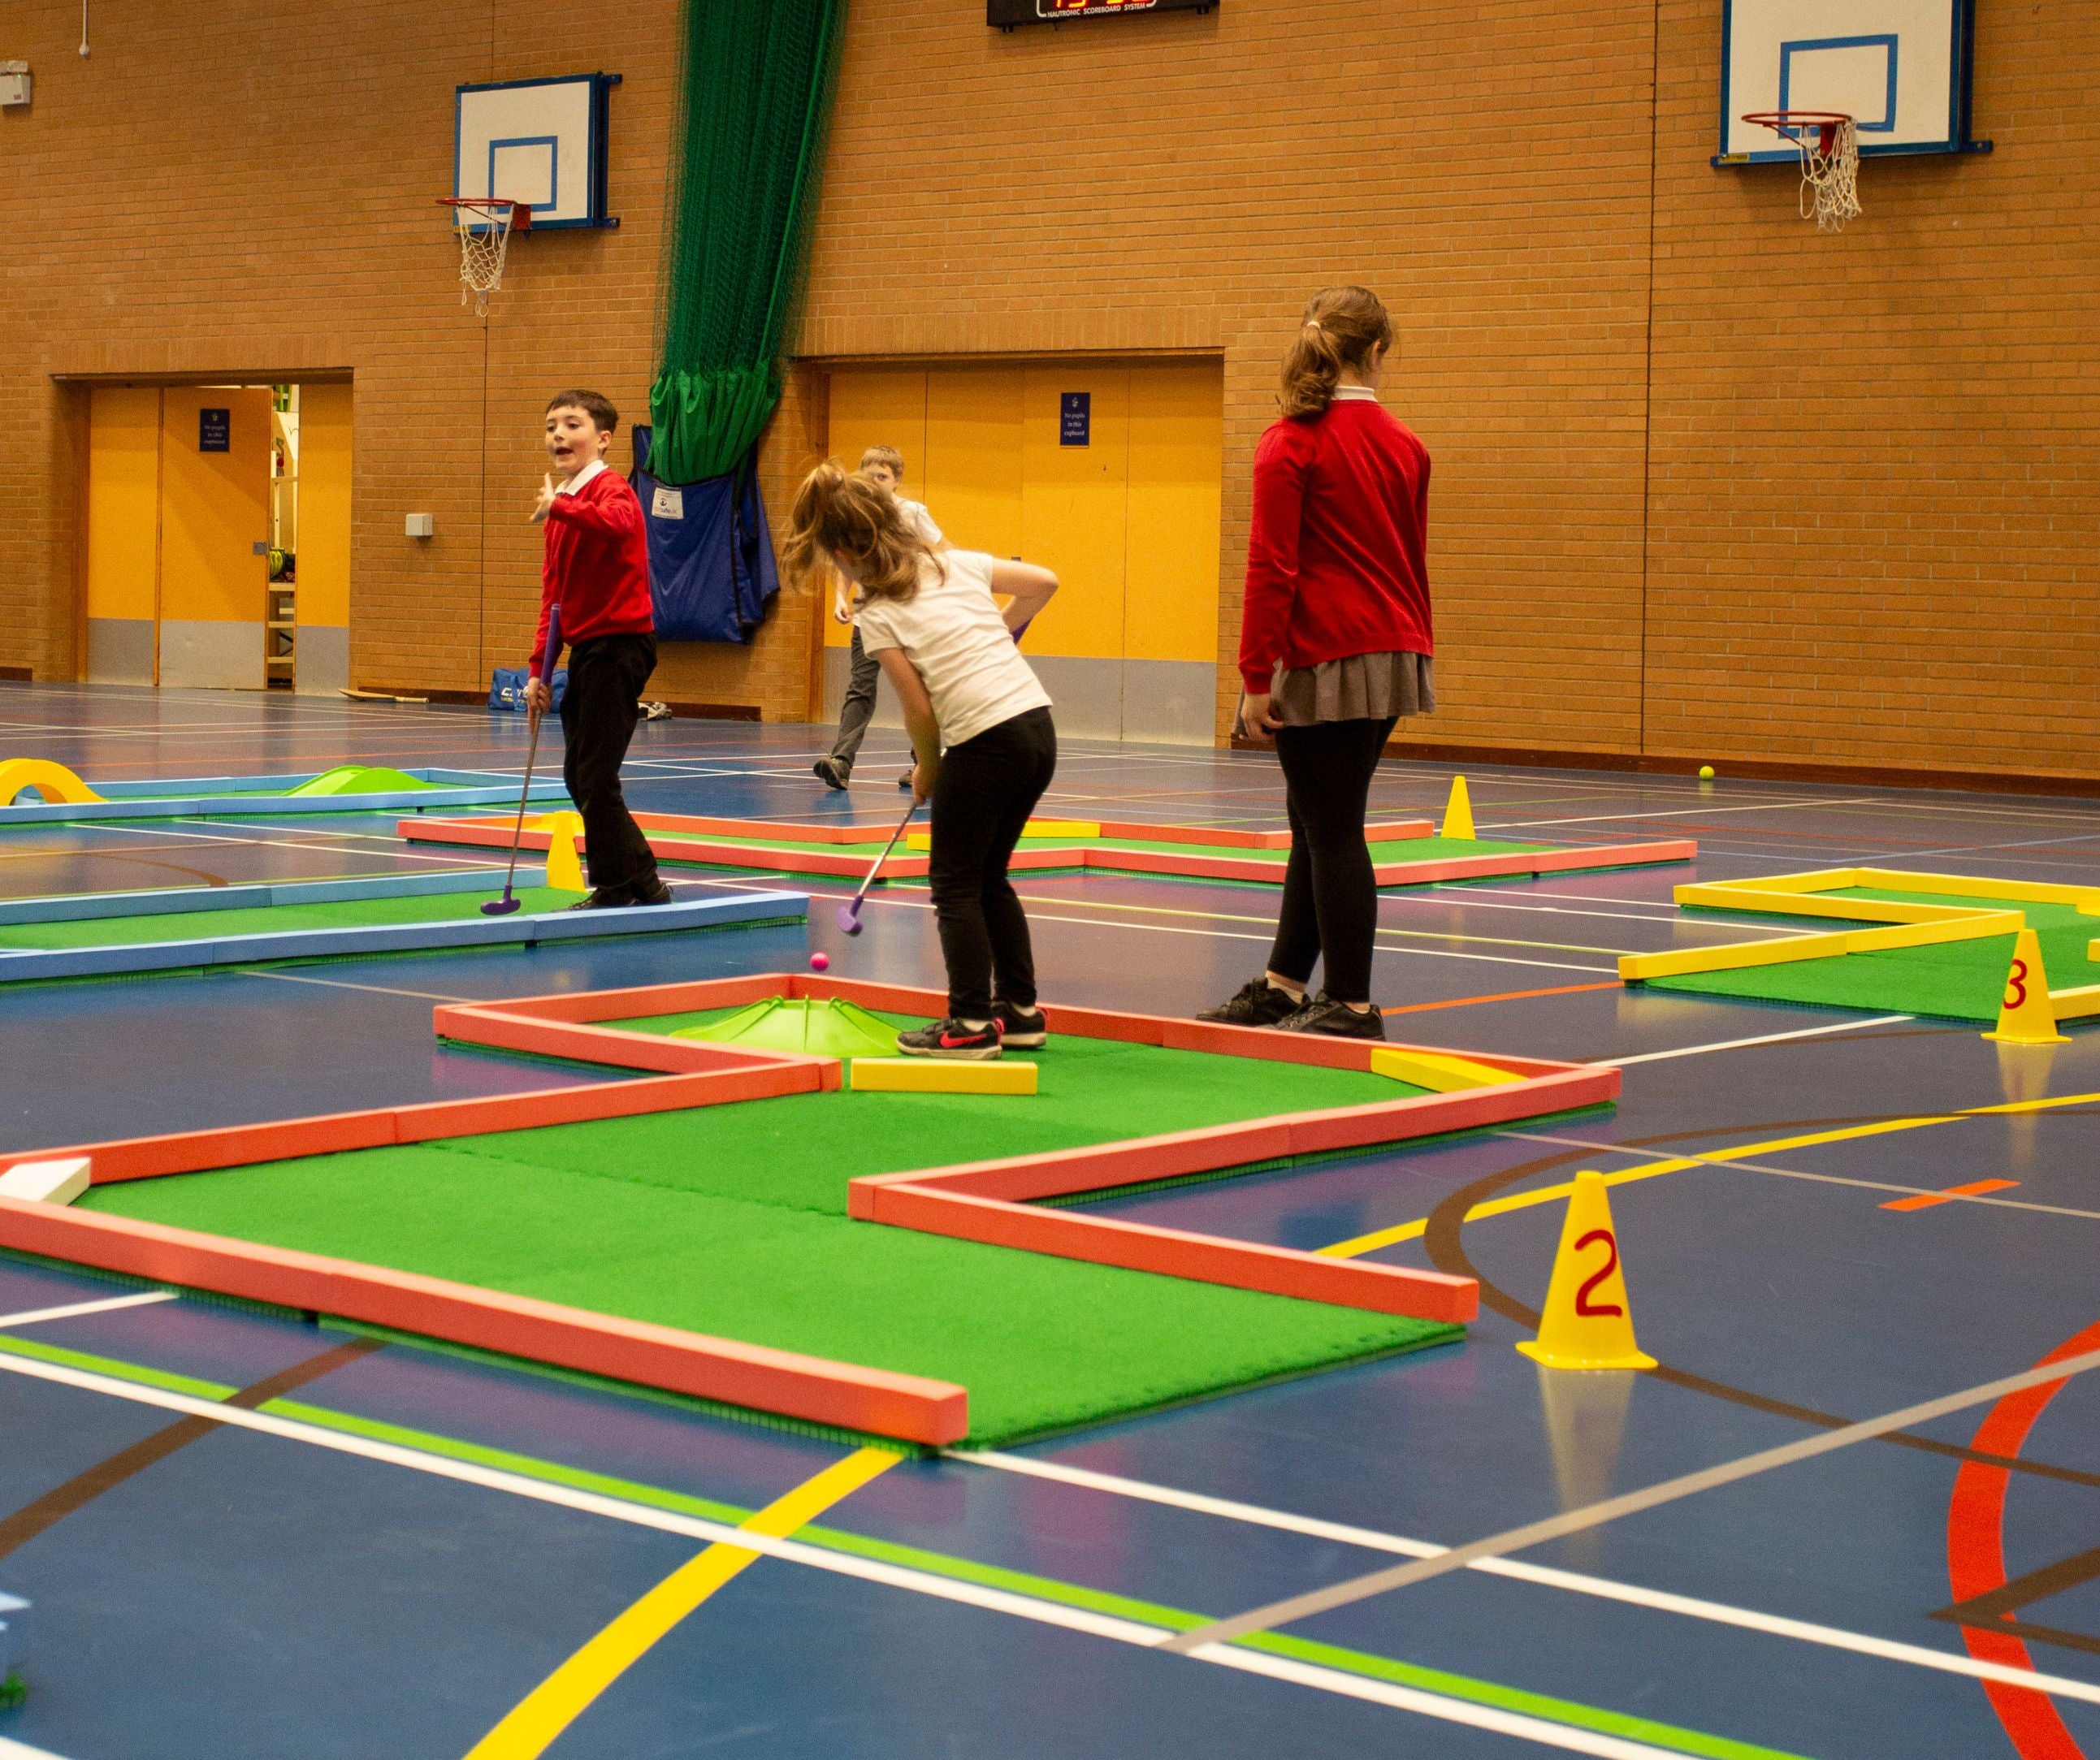 School children playing on supersize mini golf course